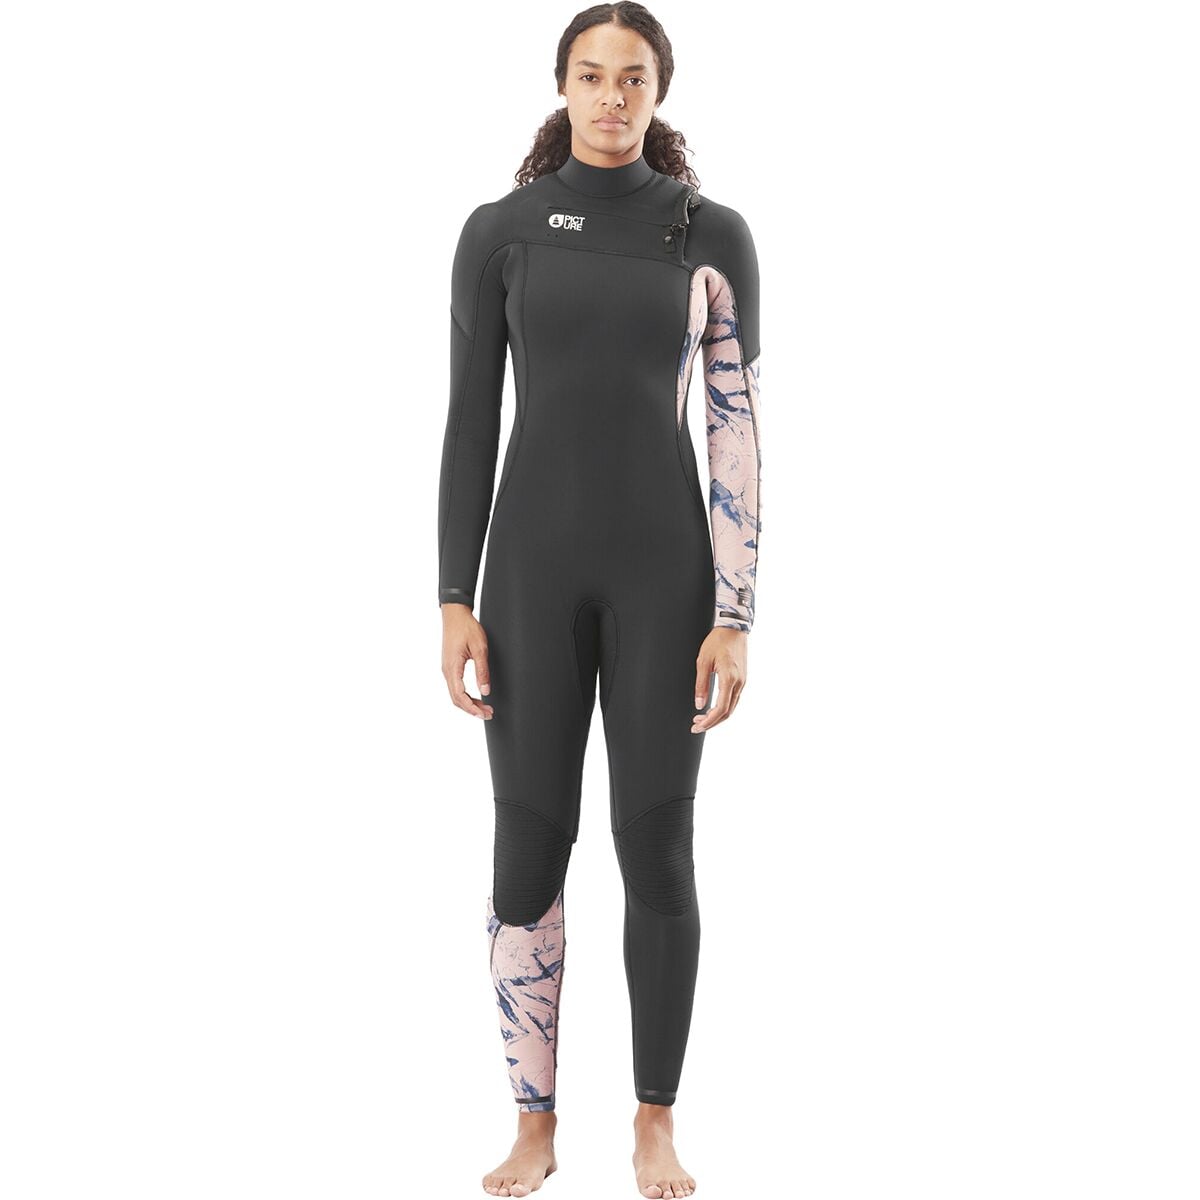 Picture Organic Equation Printed 5/4 Front Zip Wetsuit - Women's